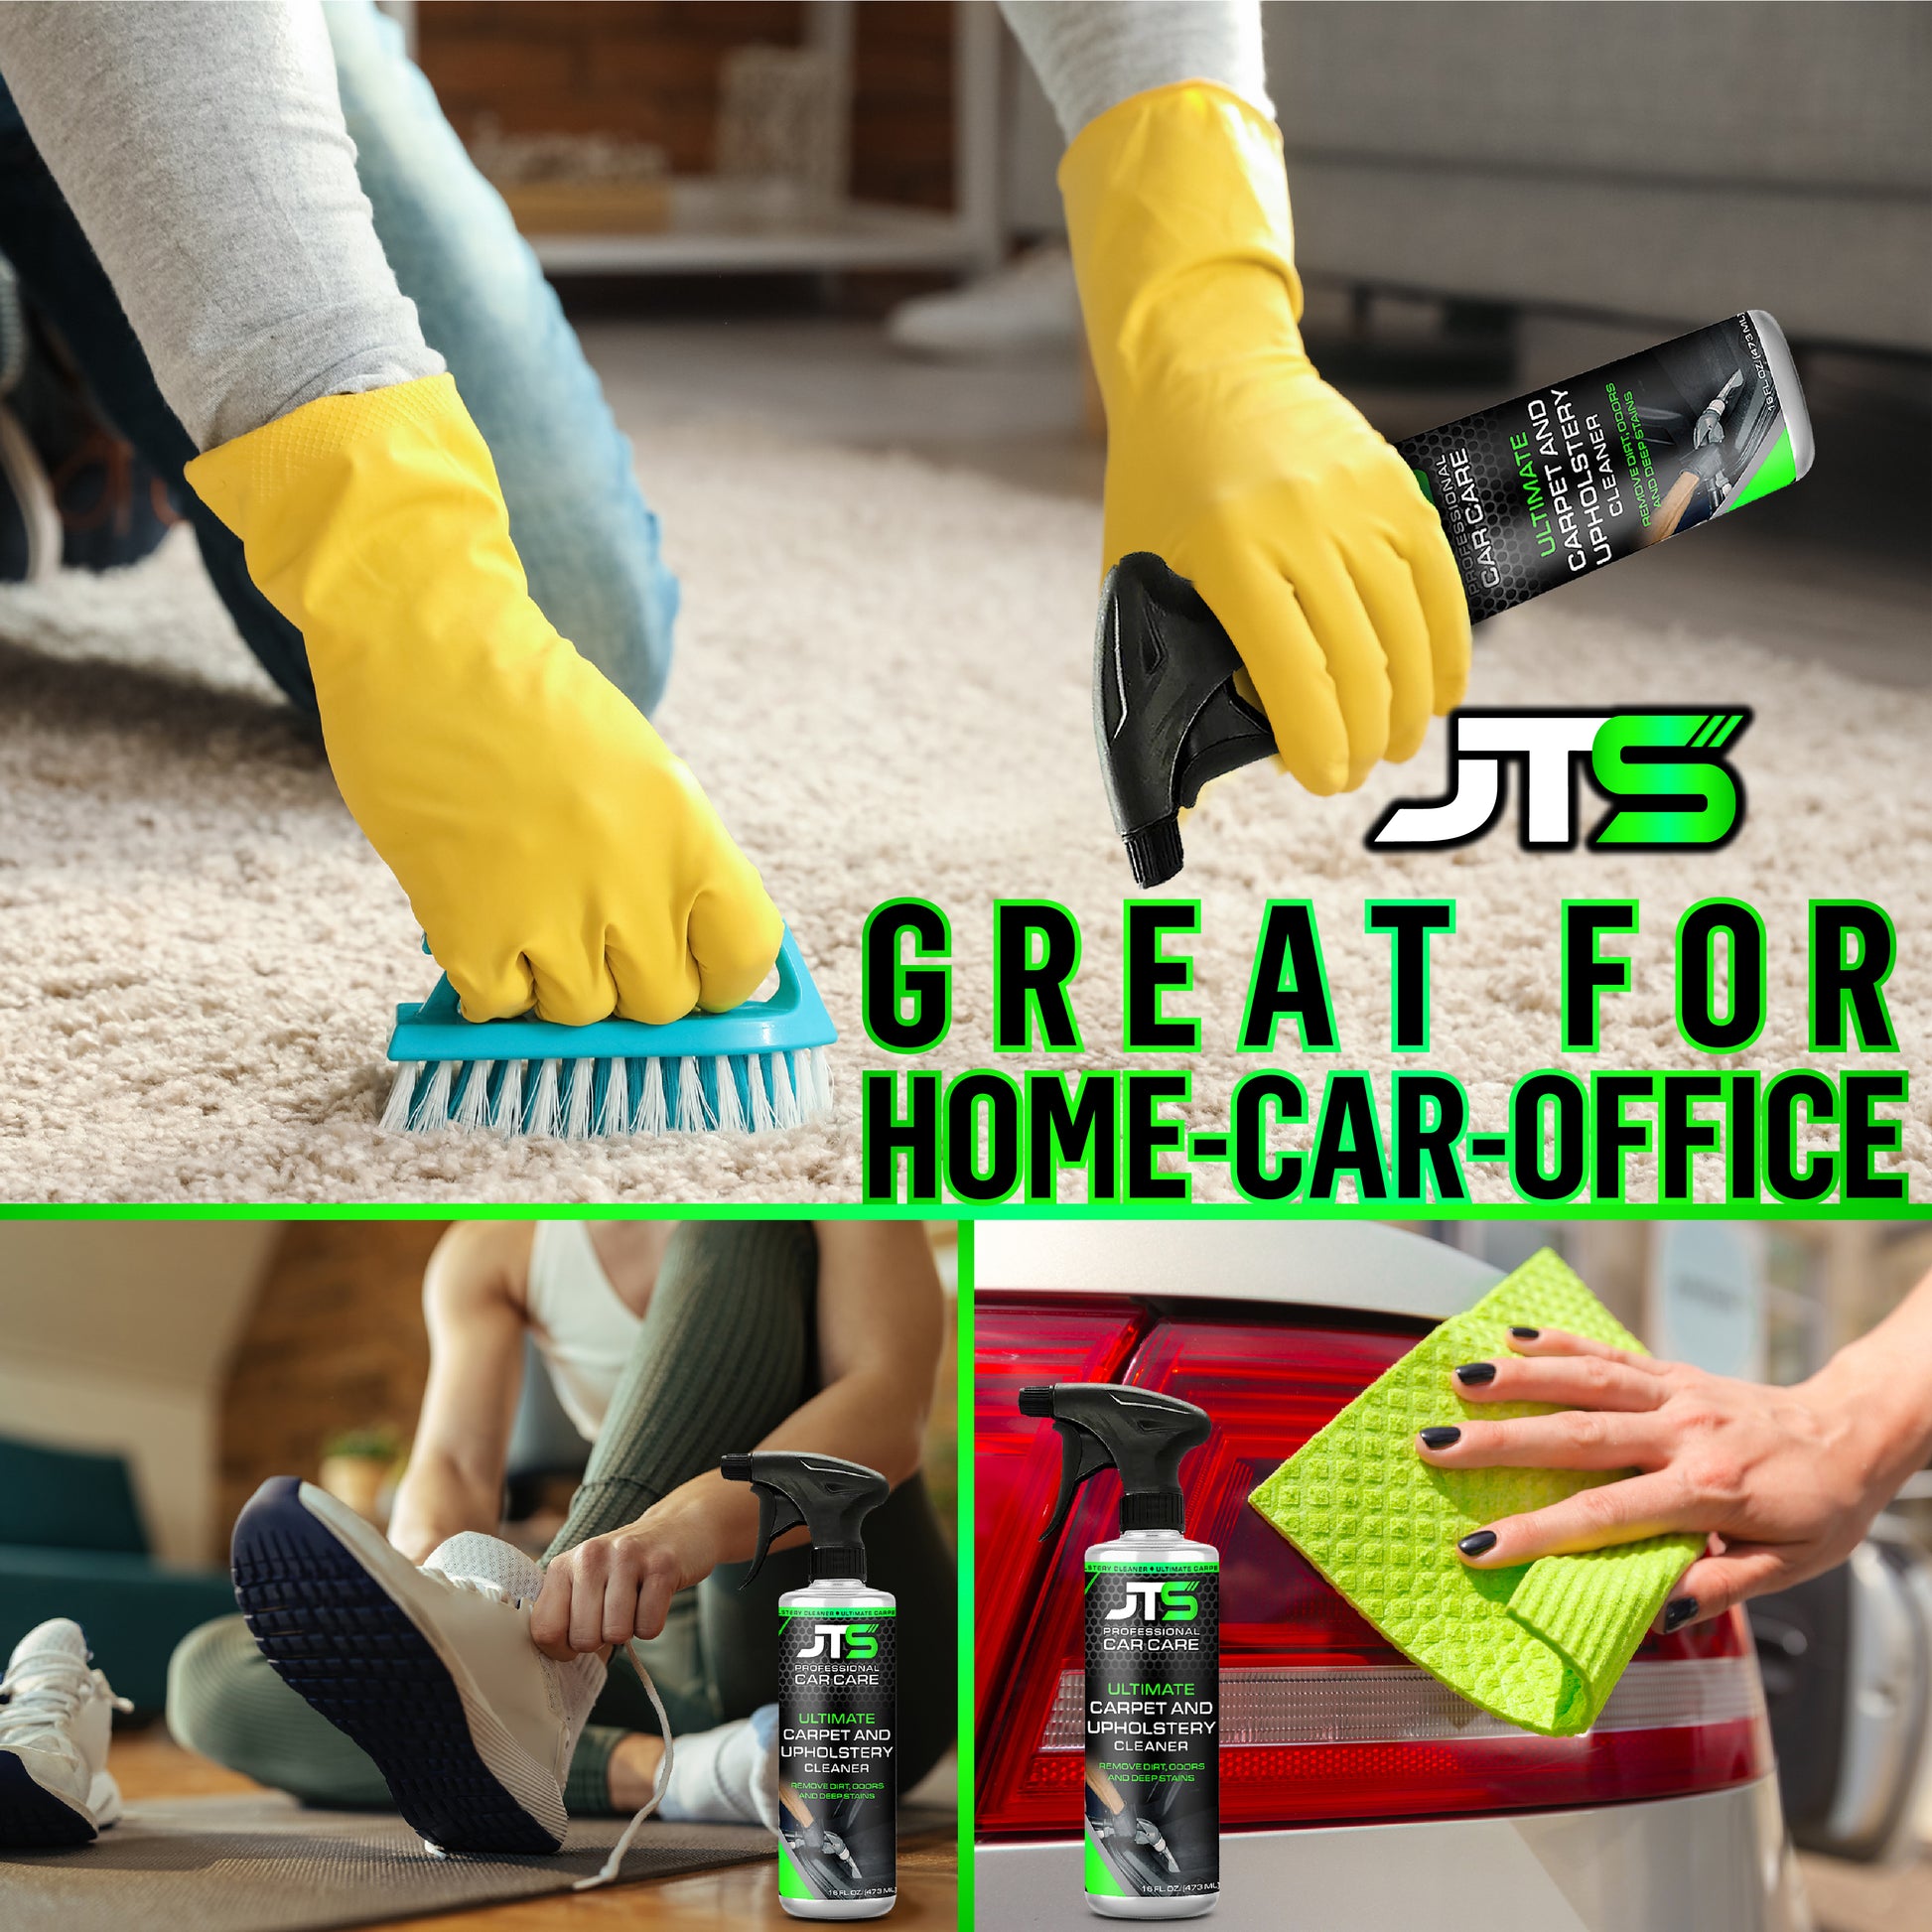 the ultimate carpet and upholstery brush | car detailing scrub brush for  cleaning interior carpet and upholstery | stain removing automotive detail